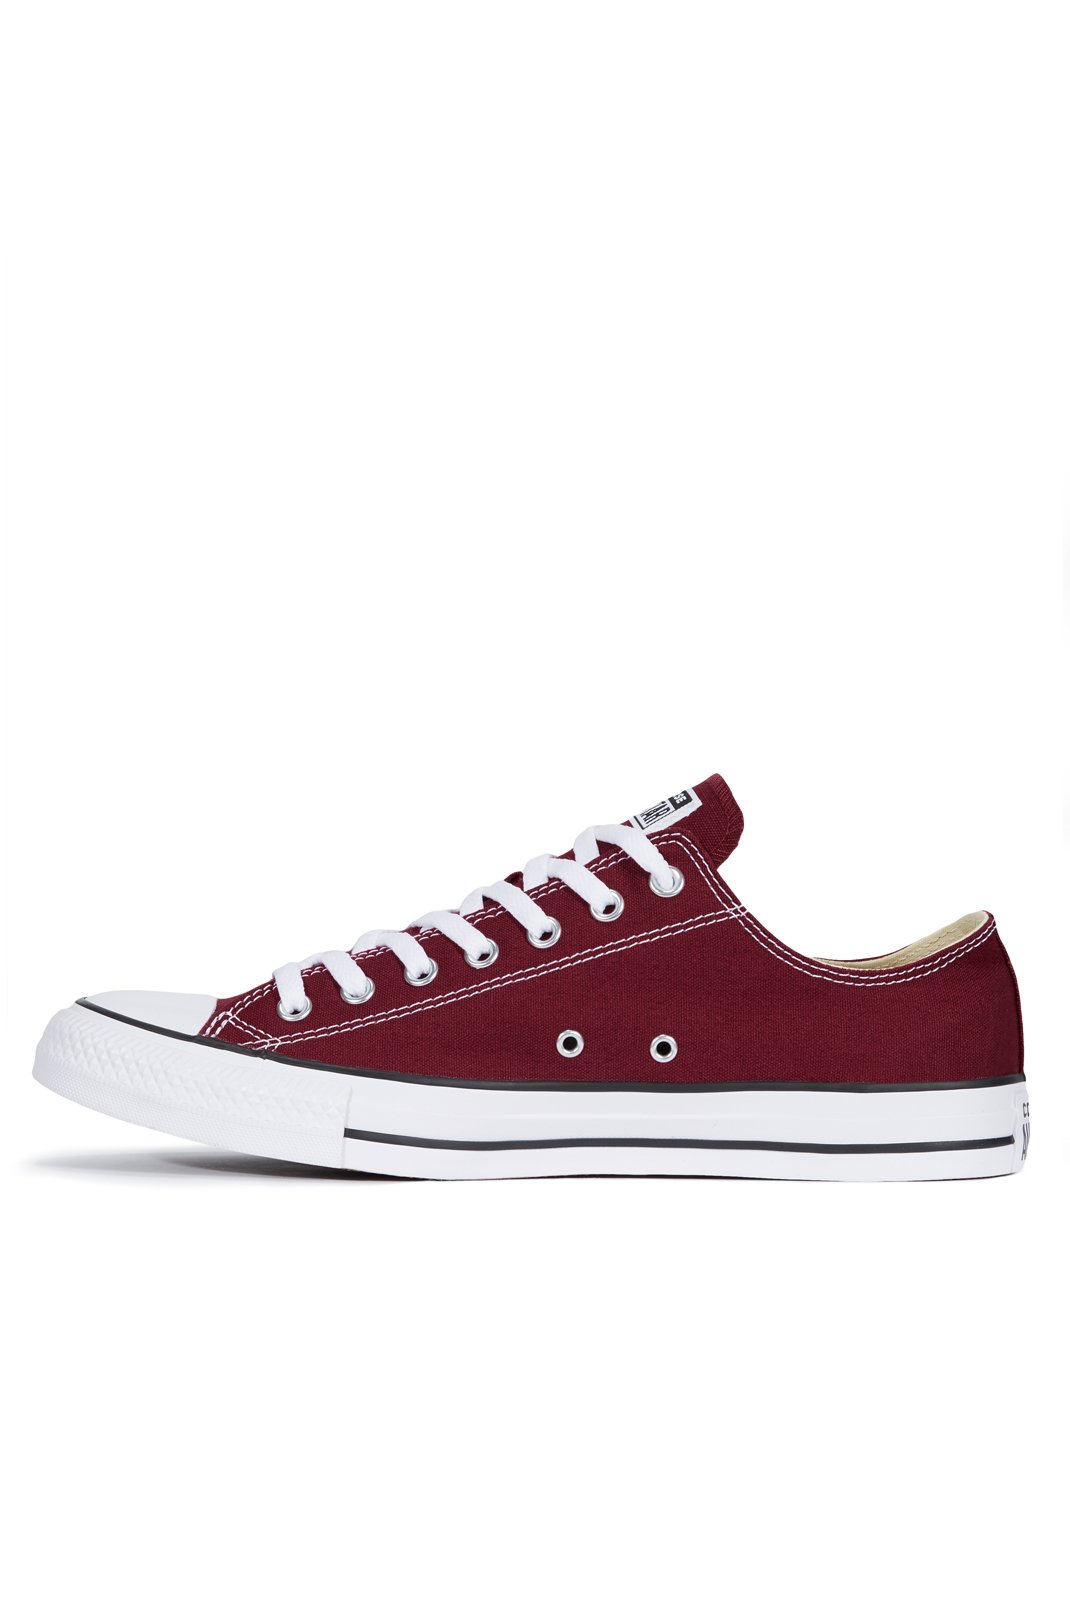 Chaussures   Converse M9691 Maroon